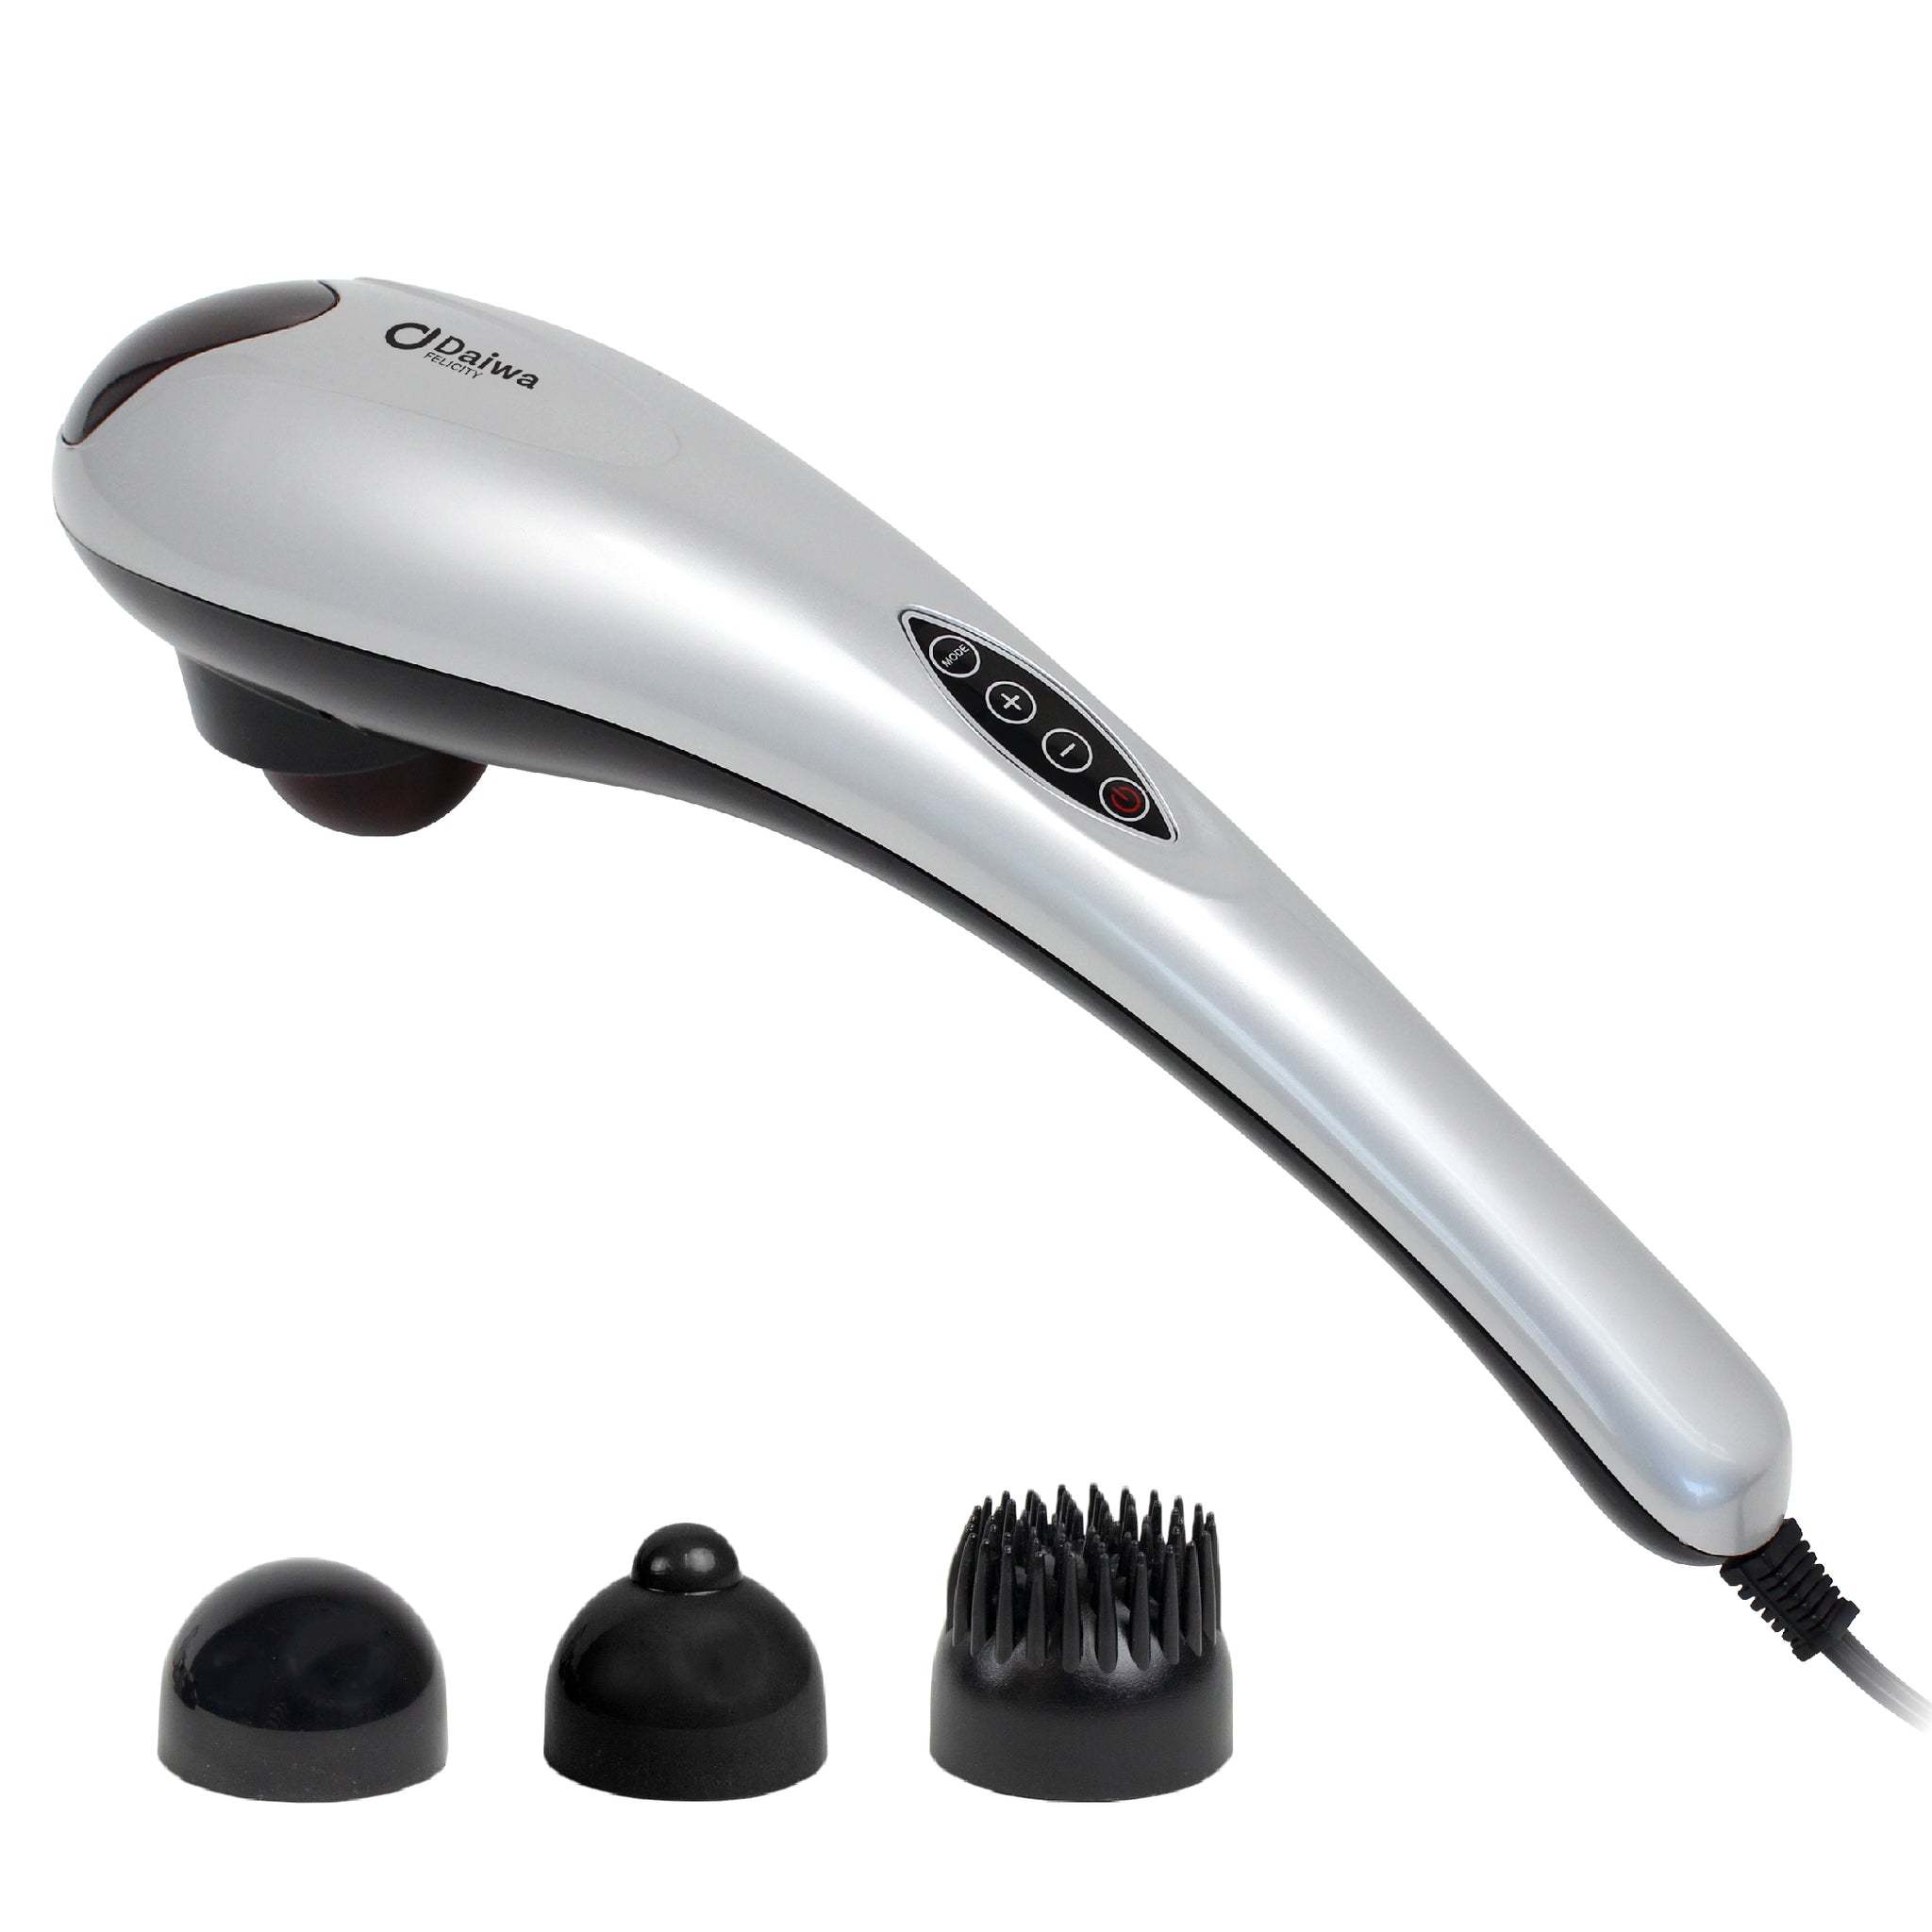 Tapping Pro Handheld Percussion Massager